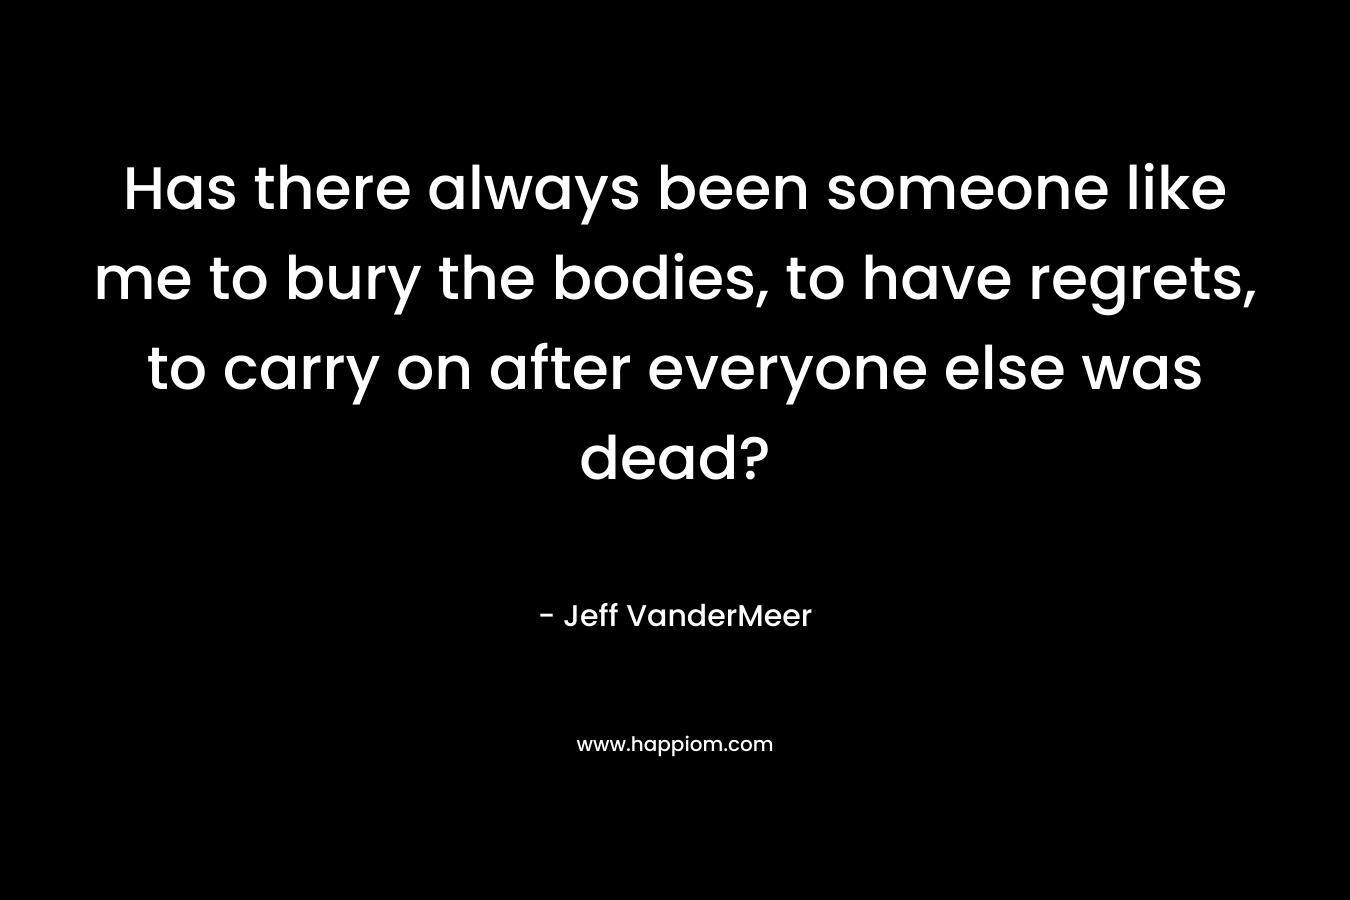 Has there always been someone like me to bury the bodies, to have regrets, to carry on after everyone else was dead? – Jeff VanderMeer